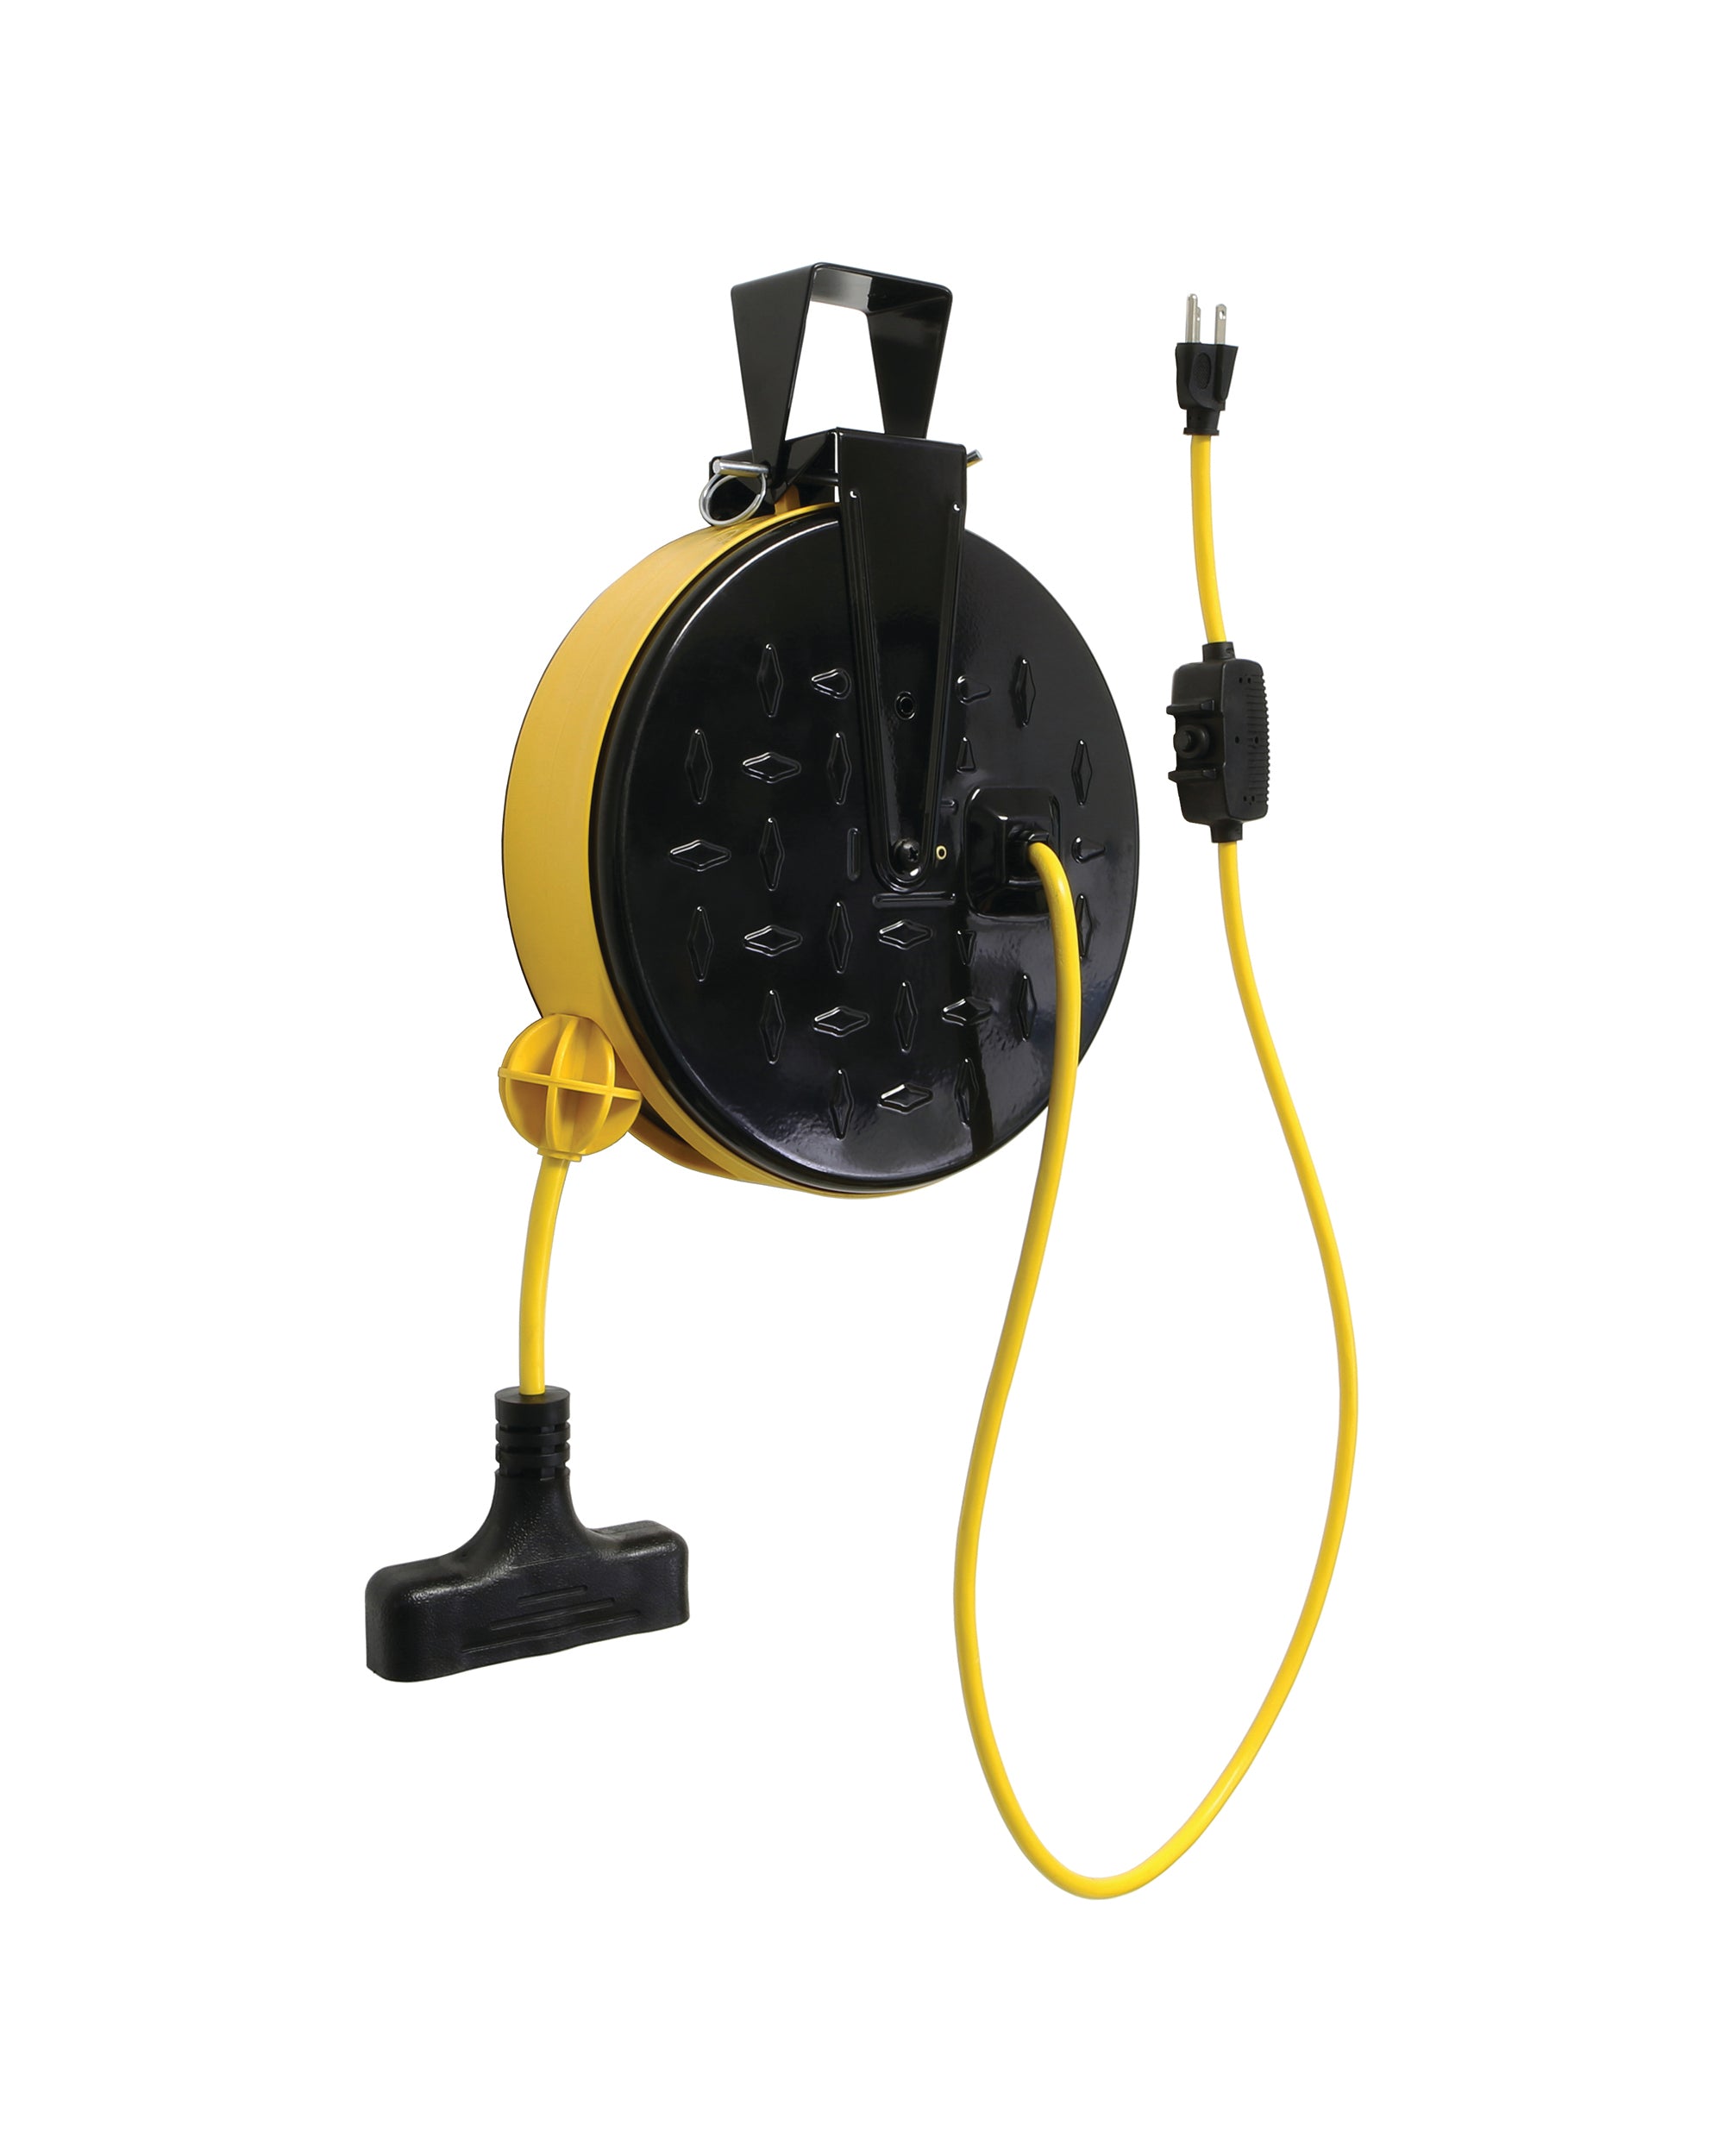 High-Quality Retractable Extension Cord Reel for Organized and